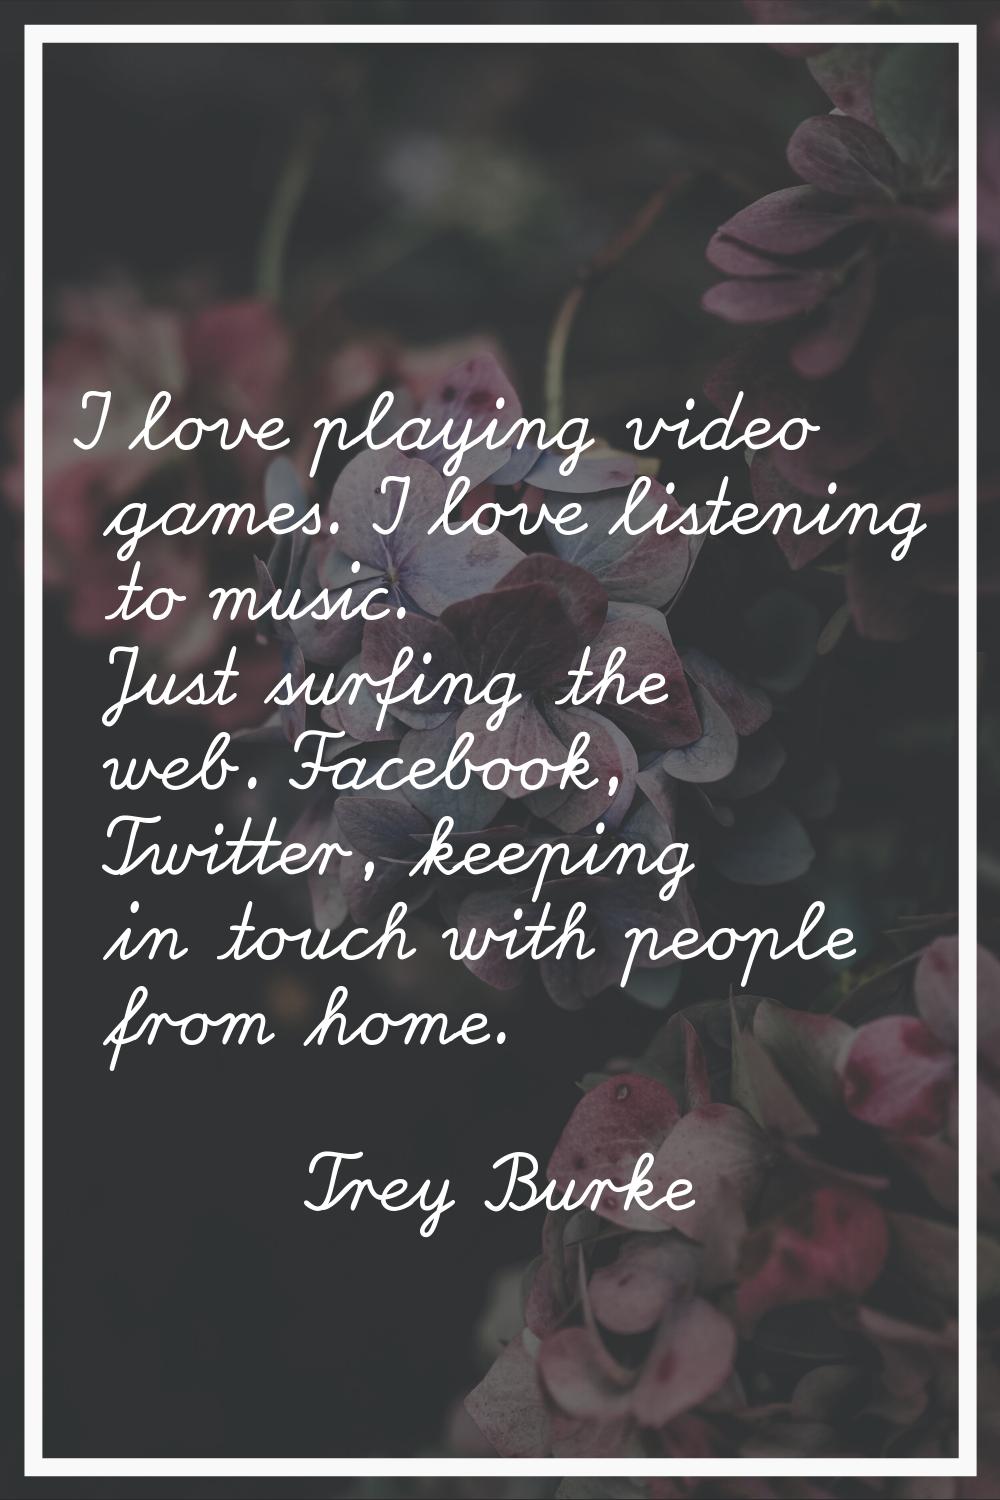 I love playing video games. I love listening to music. Just surfing the web. Facebook, Twitter, kee